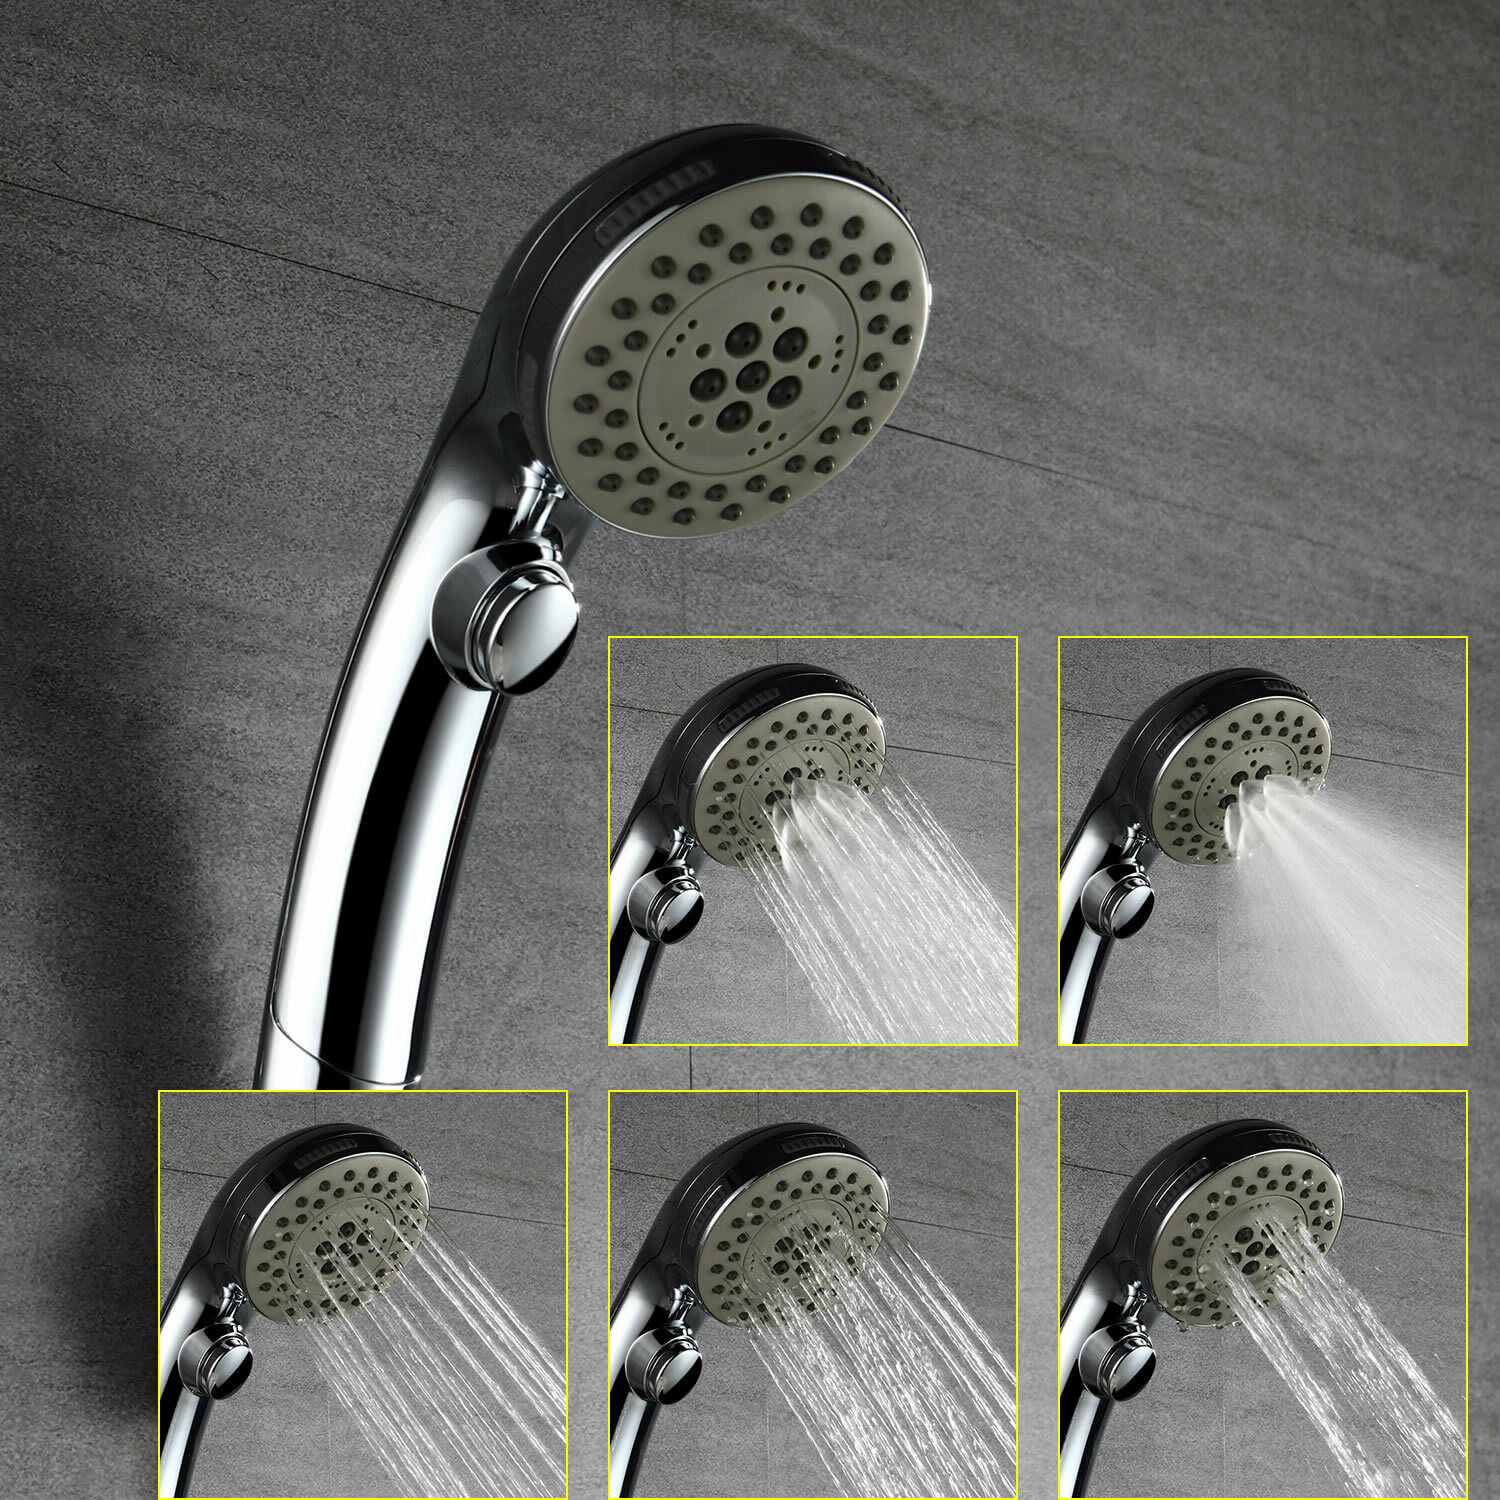 JOMOO Square Ultra Thin Stainless Steel 10 inch Rain Shower Head TPR Nozzle Chrome Finish